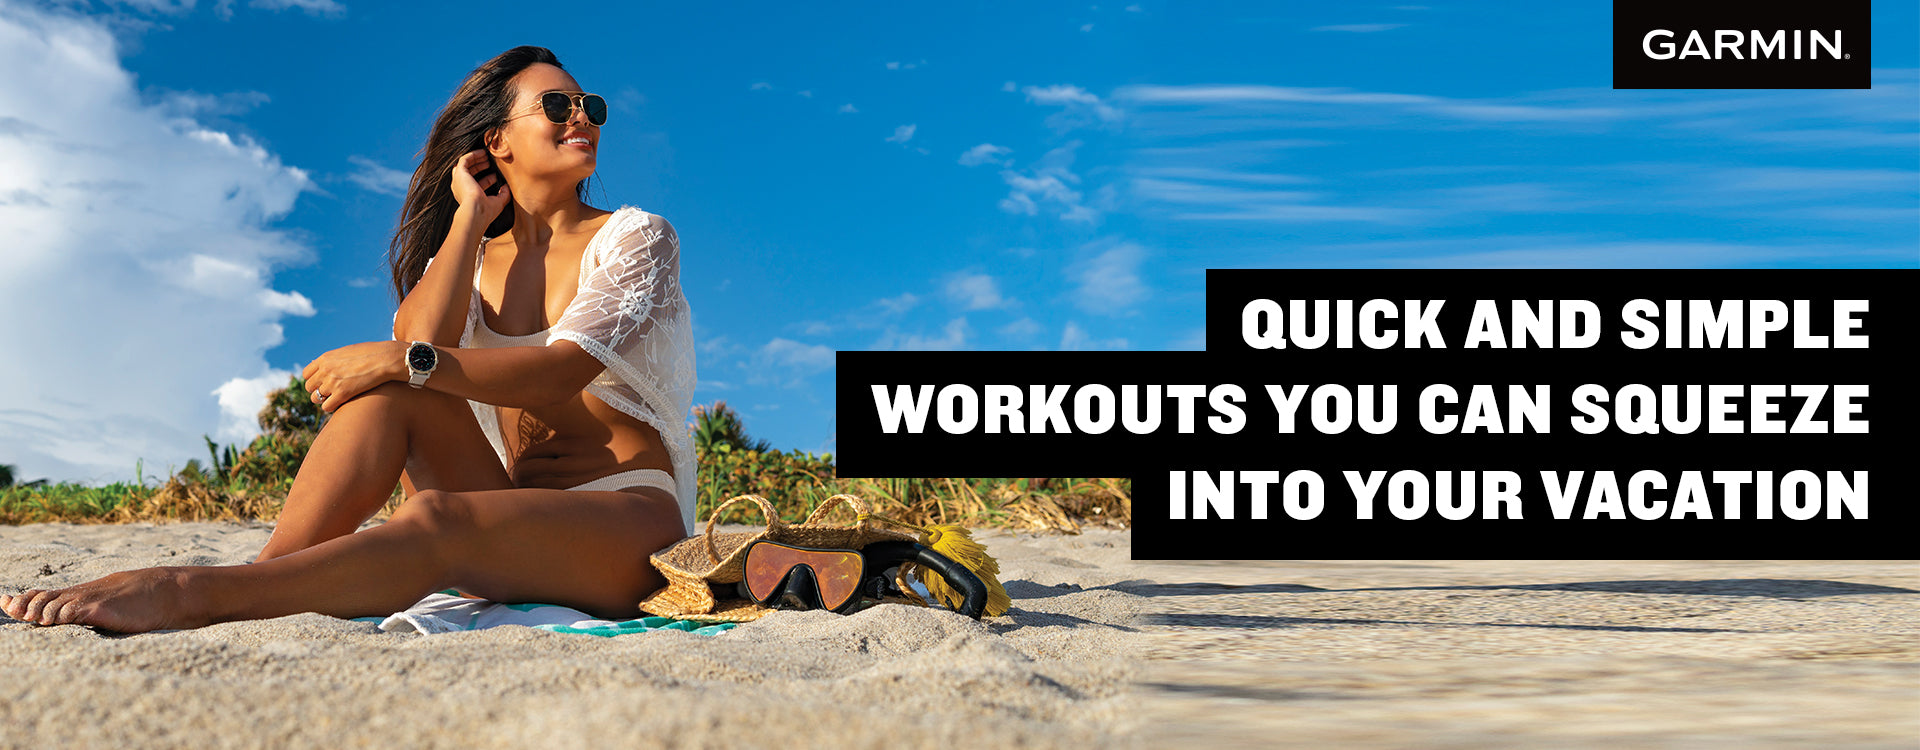 Quick and Simple Workouts You Can Squeeze into Your Vacation